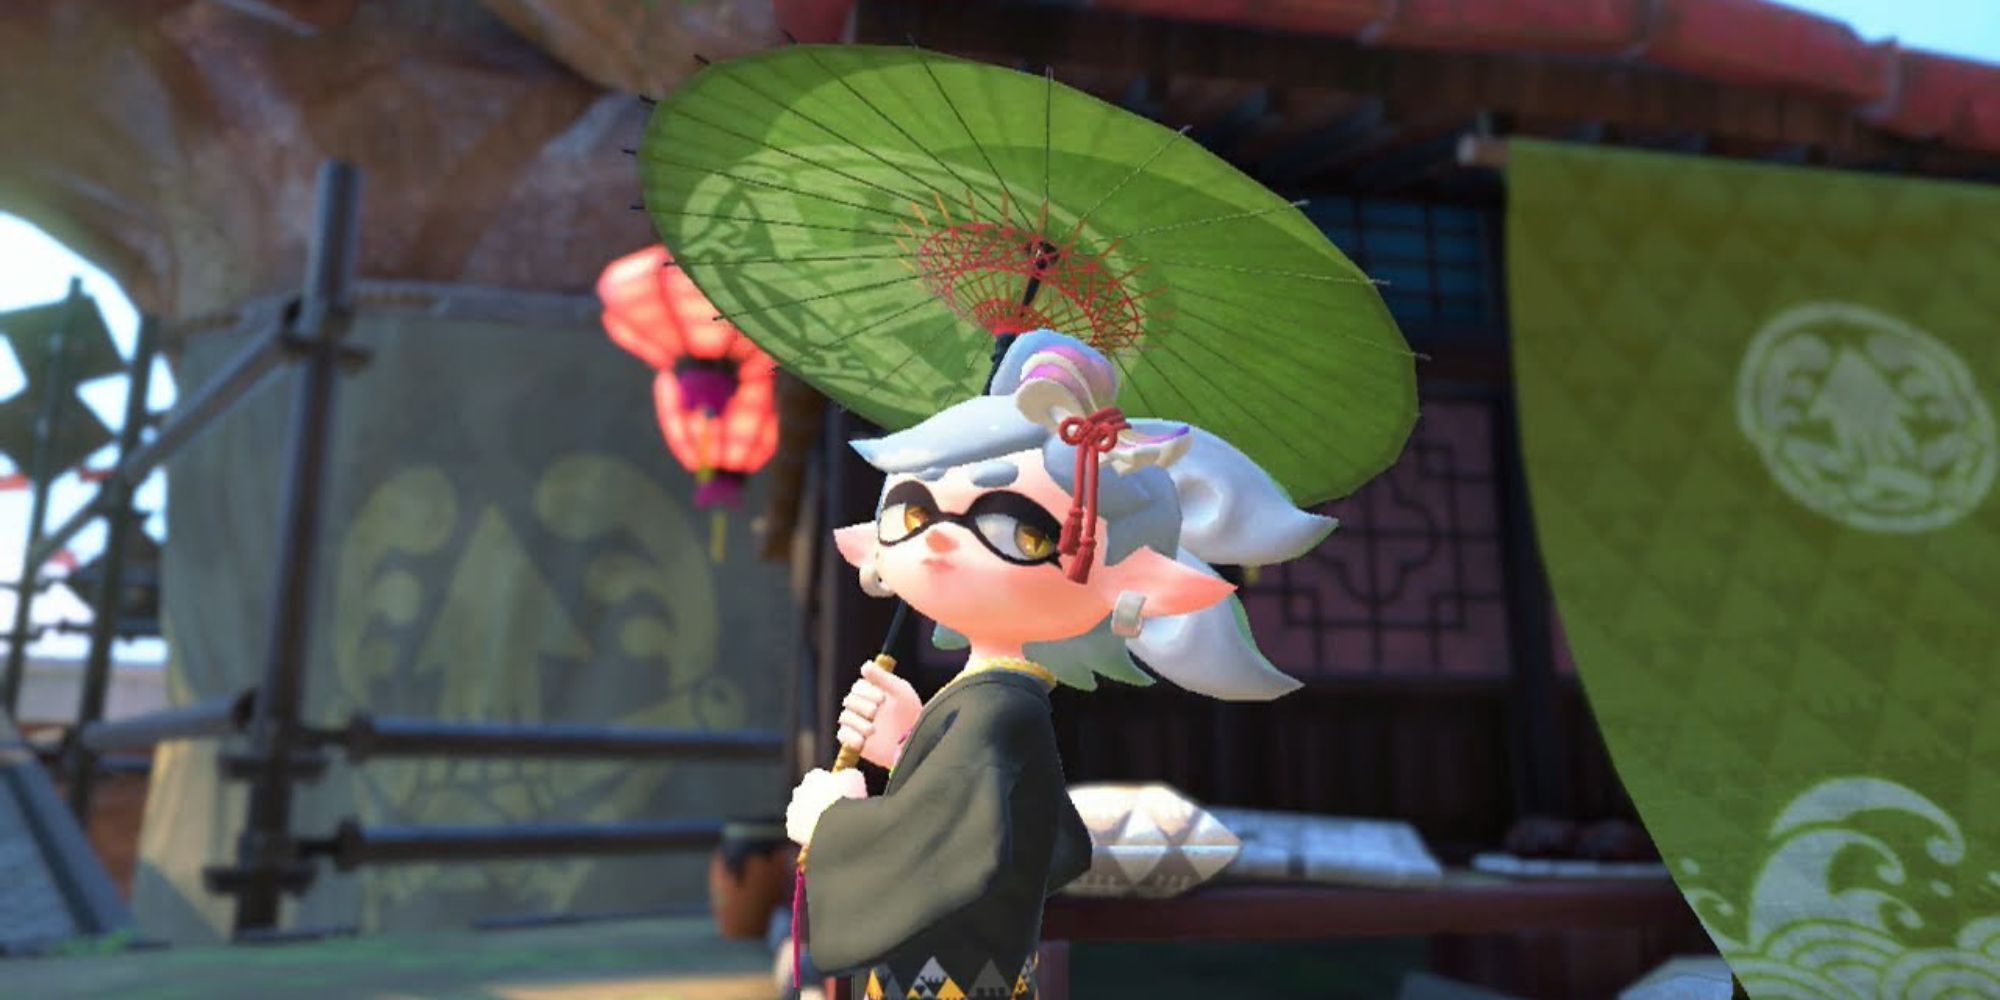 Marie stands under an umbrella at the entrance to the Splatoon campaign